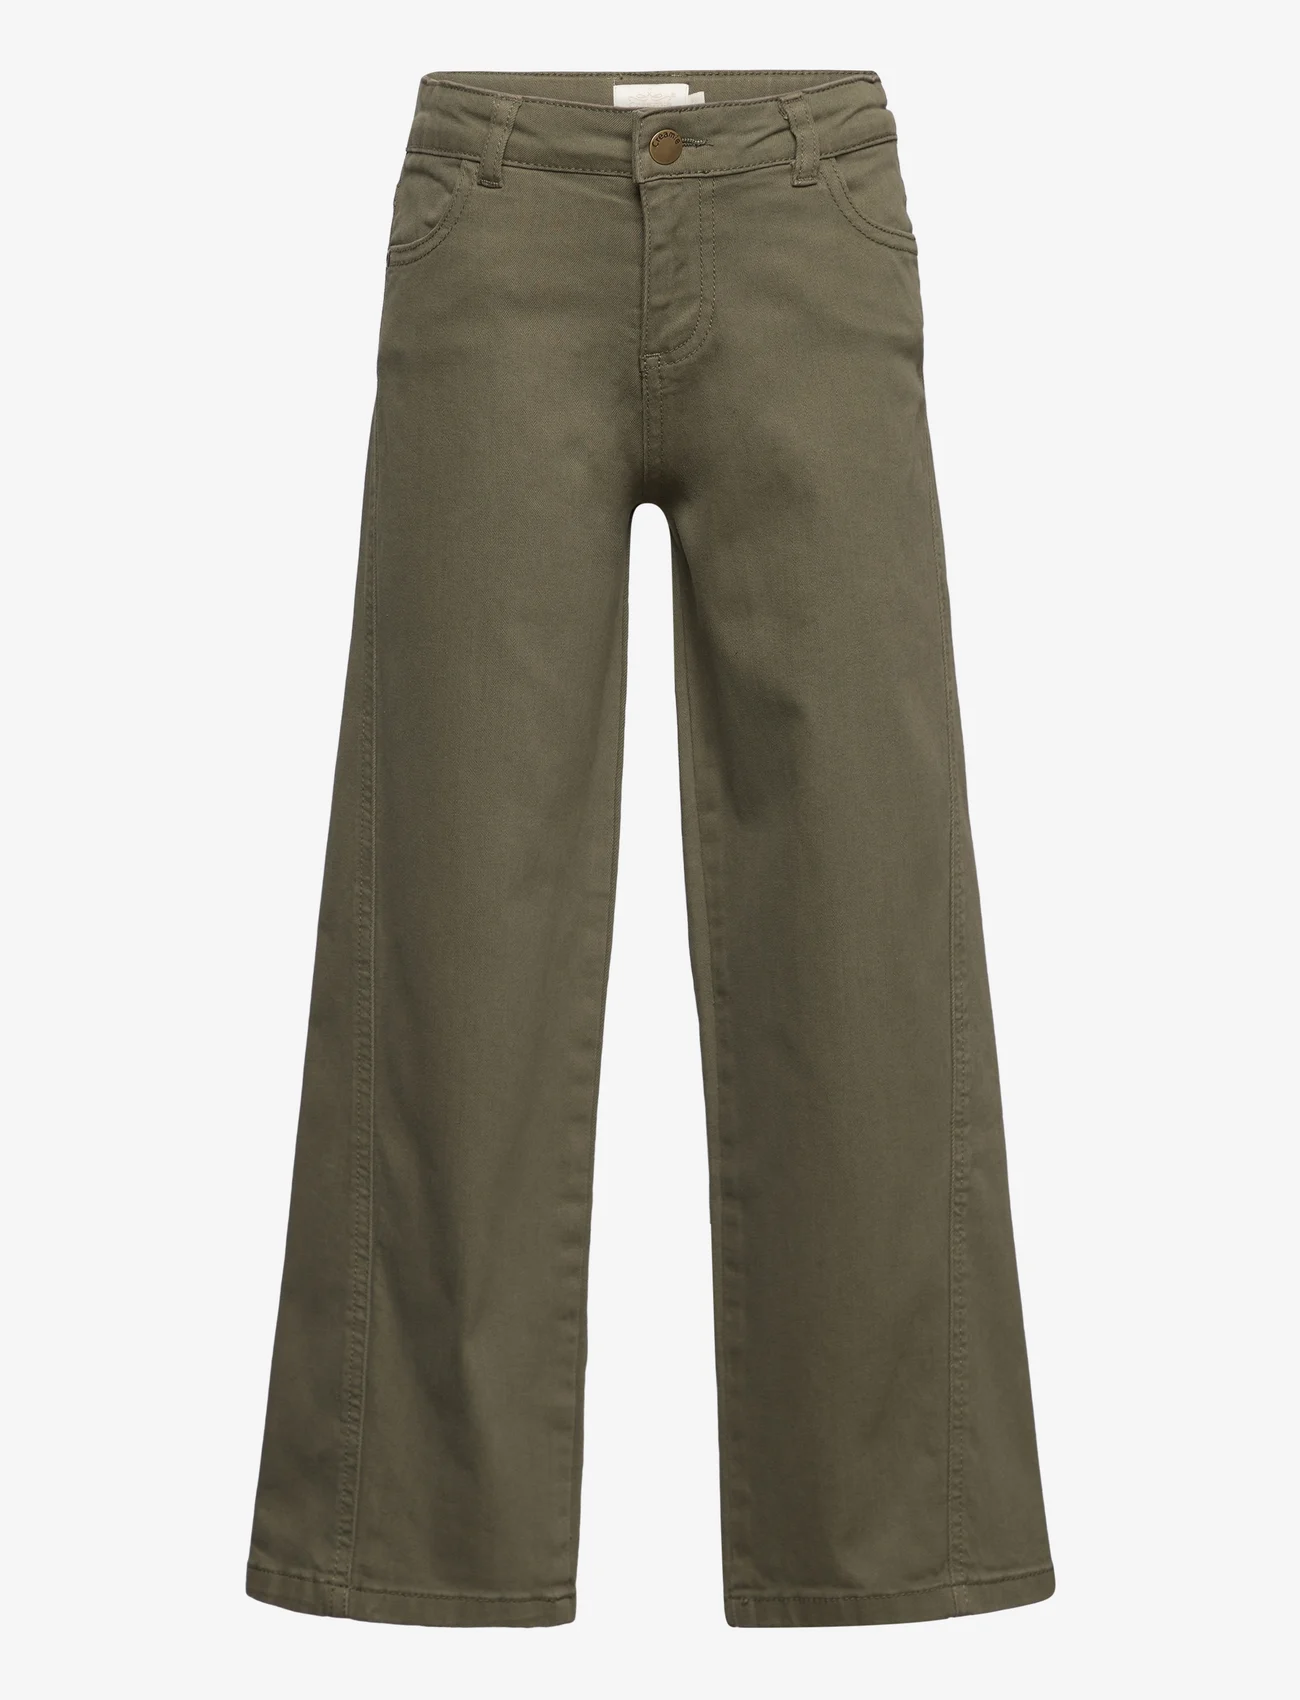 Creamie - Jeans Wide - pantalons larges - olive night - 0